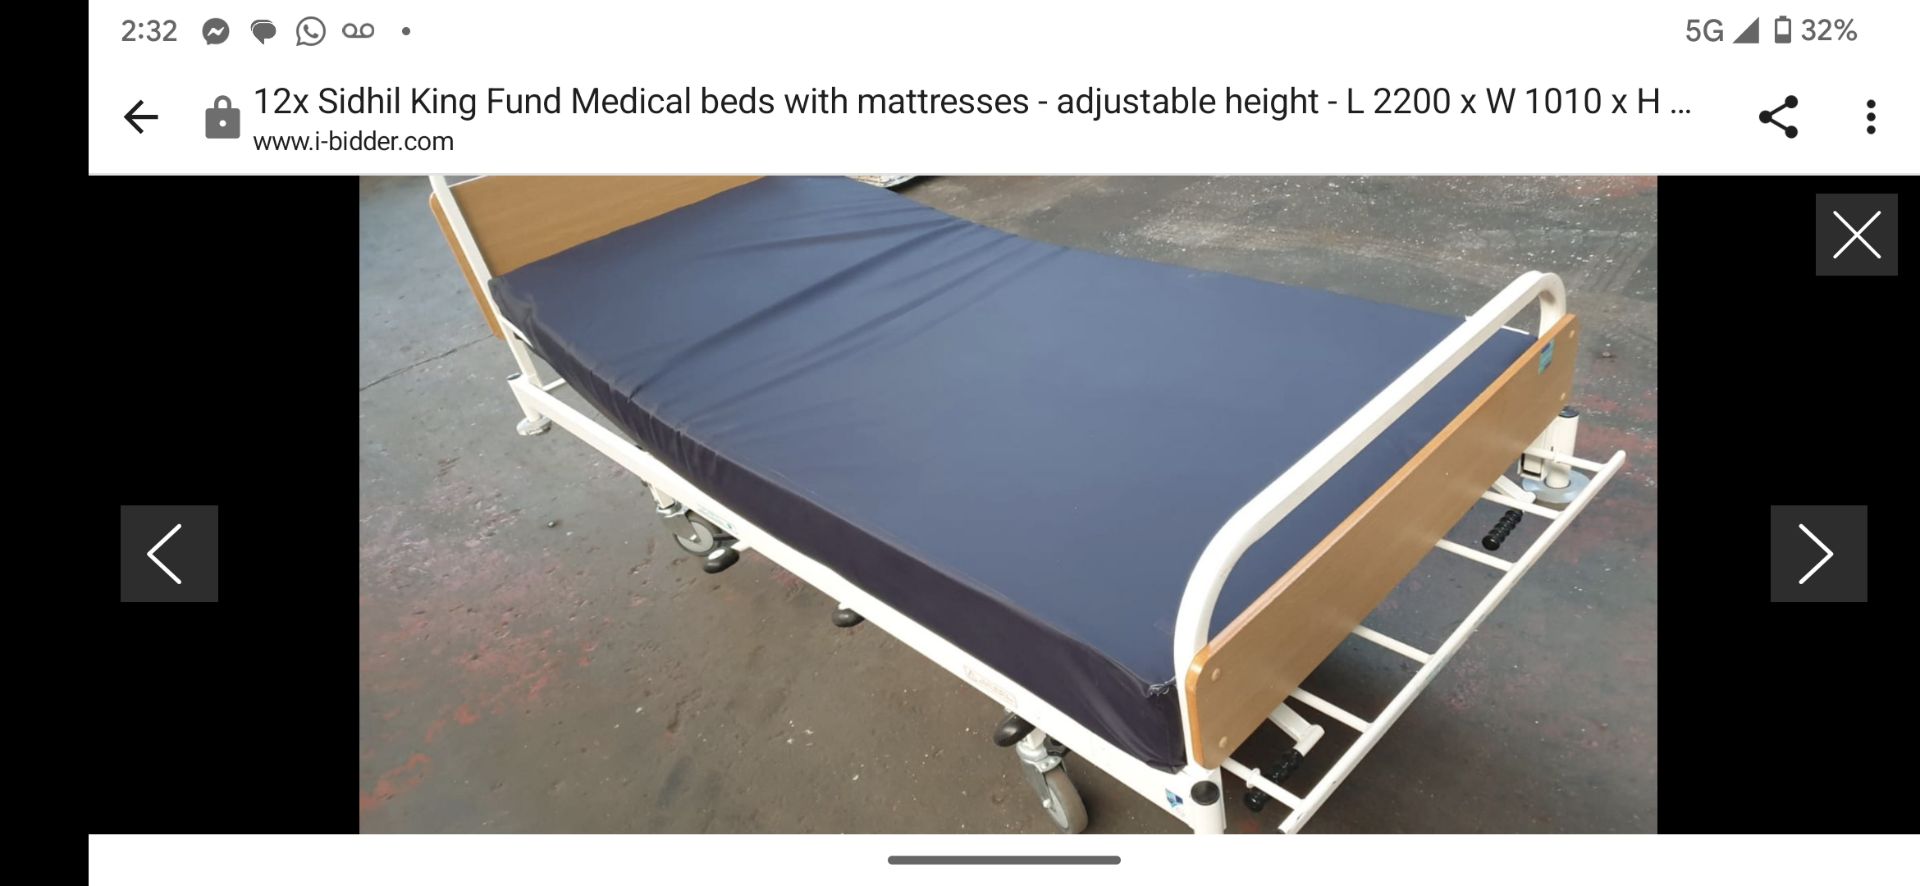 1 x Sidhil Kings Fund Hydraulic Hospital Bed With Mattress - Image 2 of 5